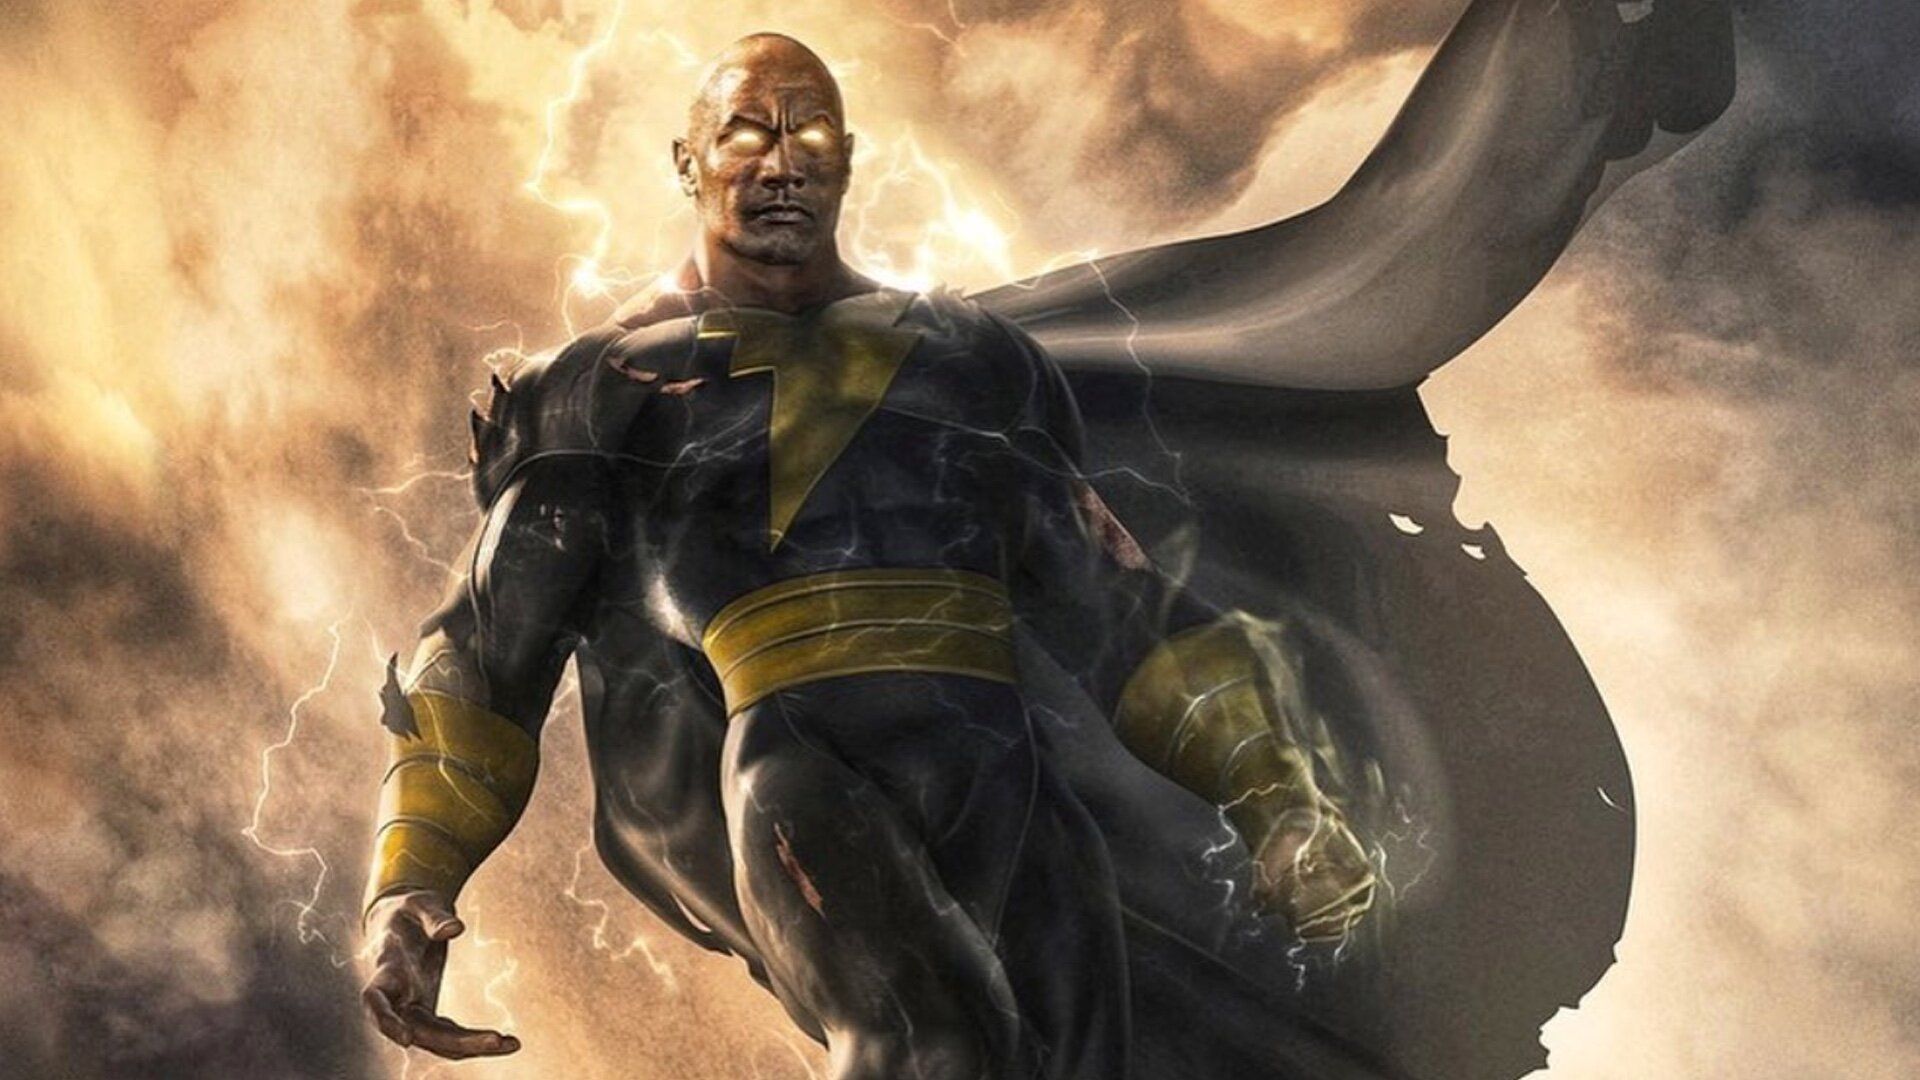 DC's 'Black Adam' Confirmed by The Rock for 12.22.21 via Instagram Post